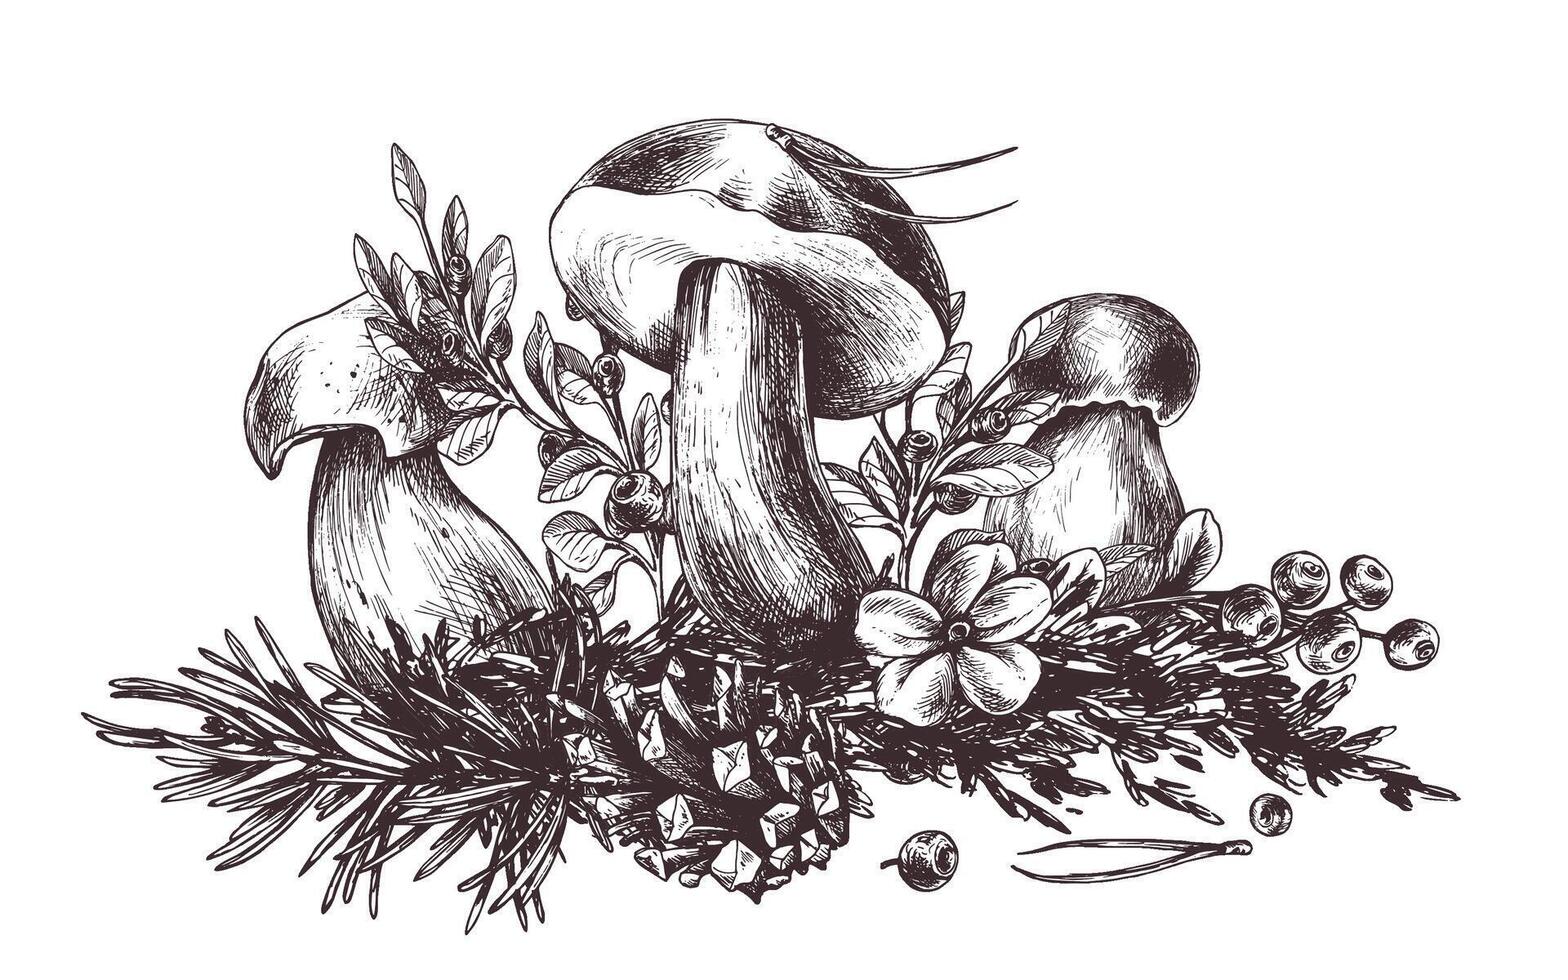 Mushrooms forest boletus with grass, blueberries, moss and cone. Graphic botanical illustration hand drawn in brown ink. For recipes, packaging, autumn festival, harvest. Isolated composition vector